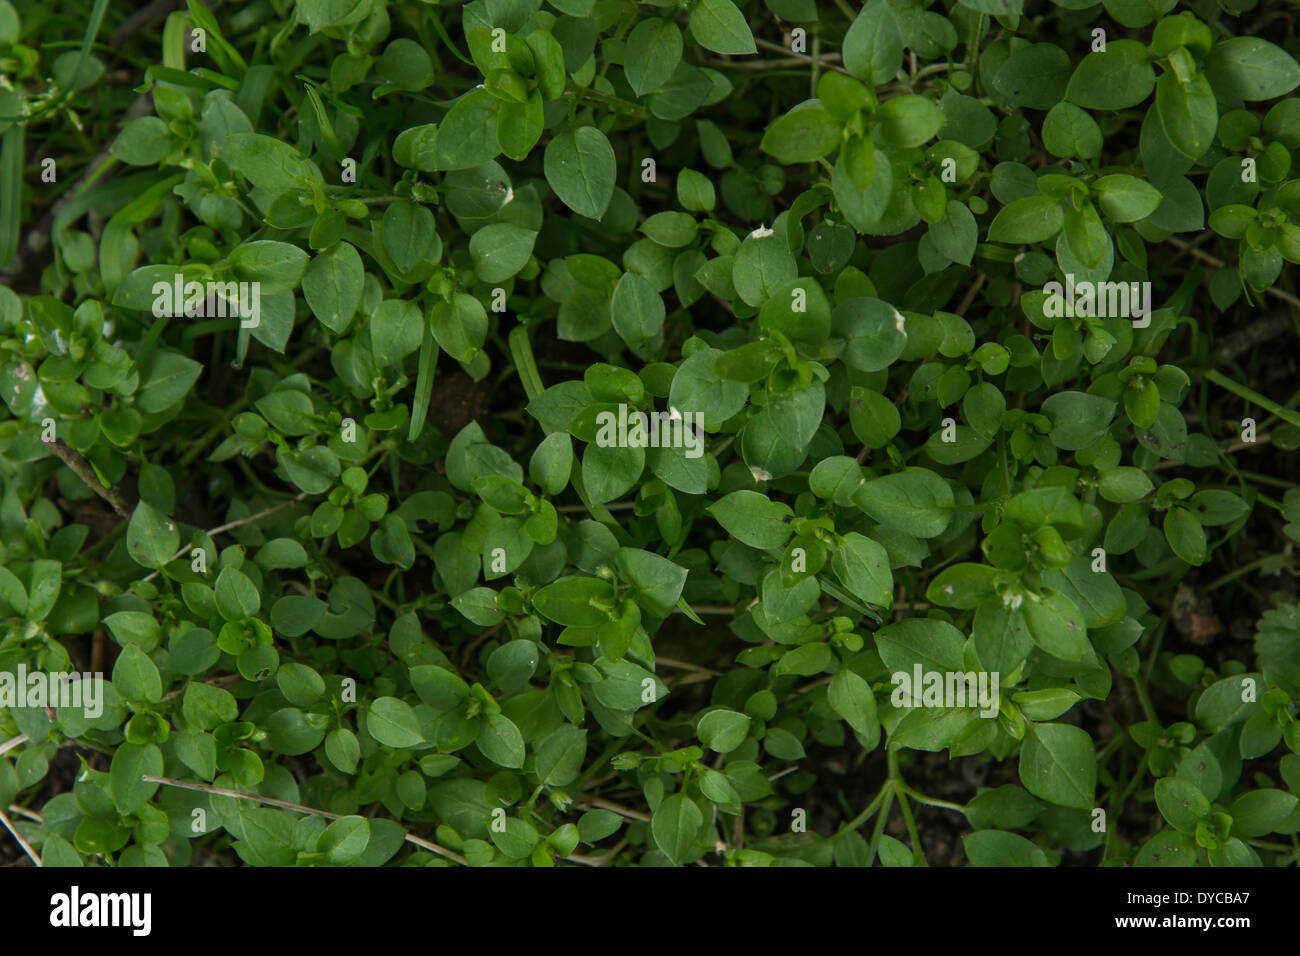 Chickweed / Stellaria media - a common annual garden weed, but also edible. Patch of weeds concept. Stock Photo